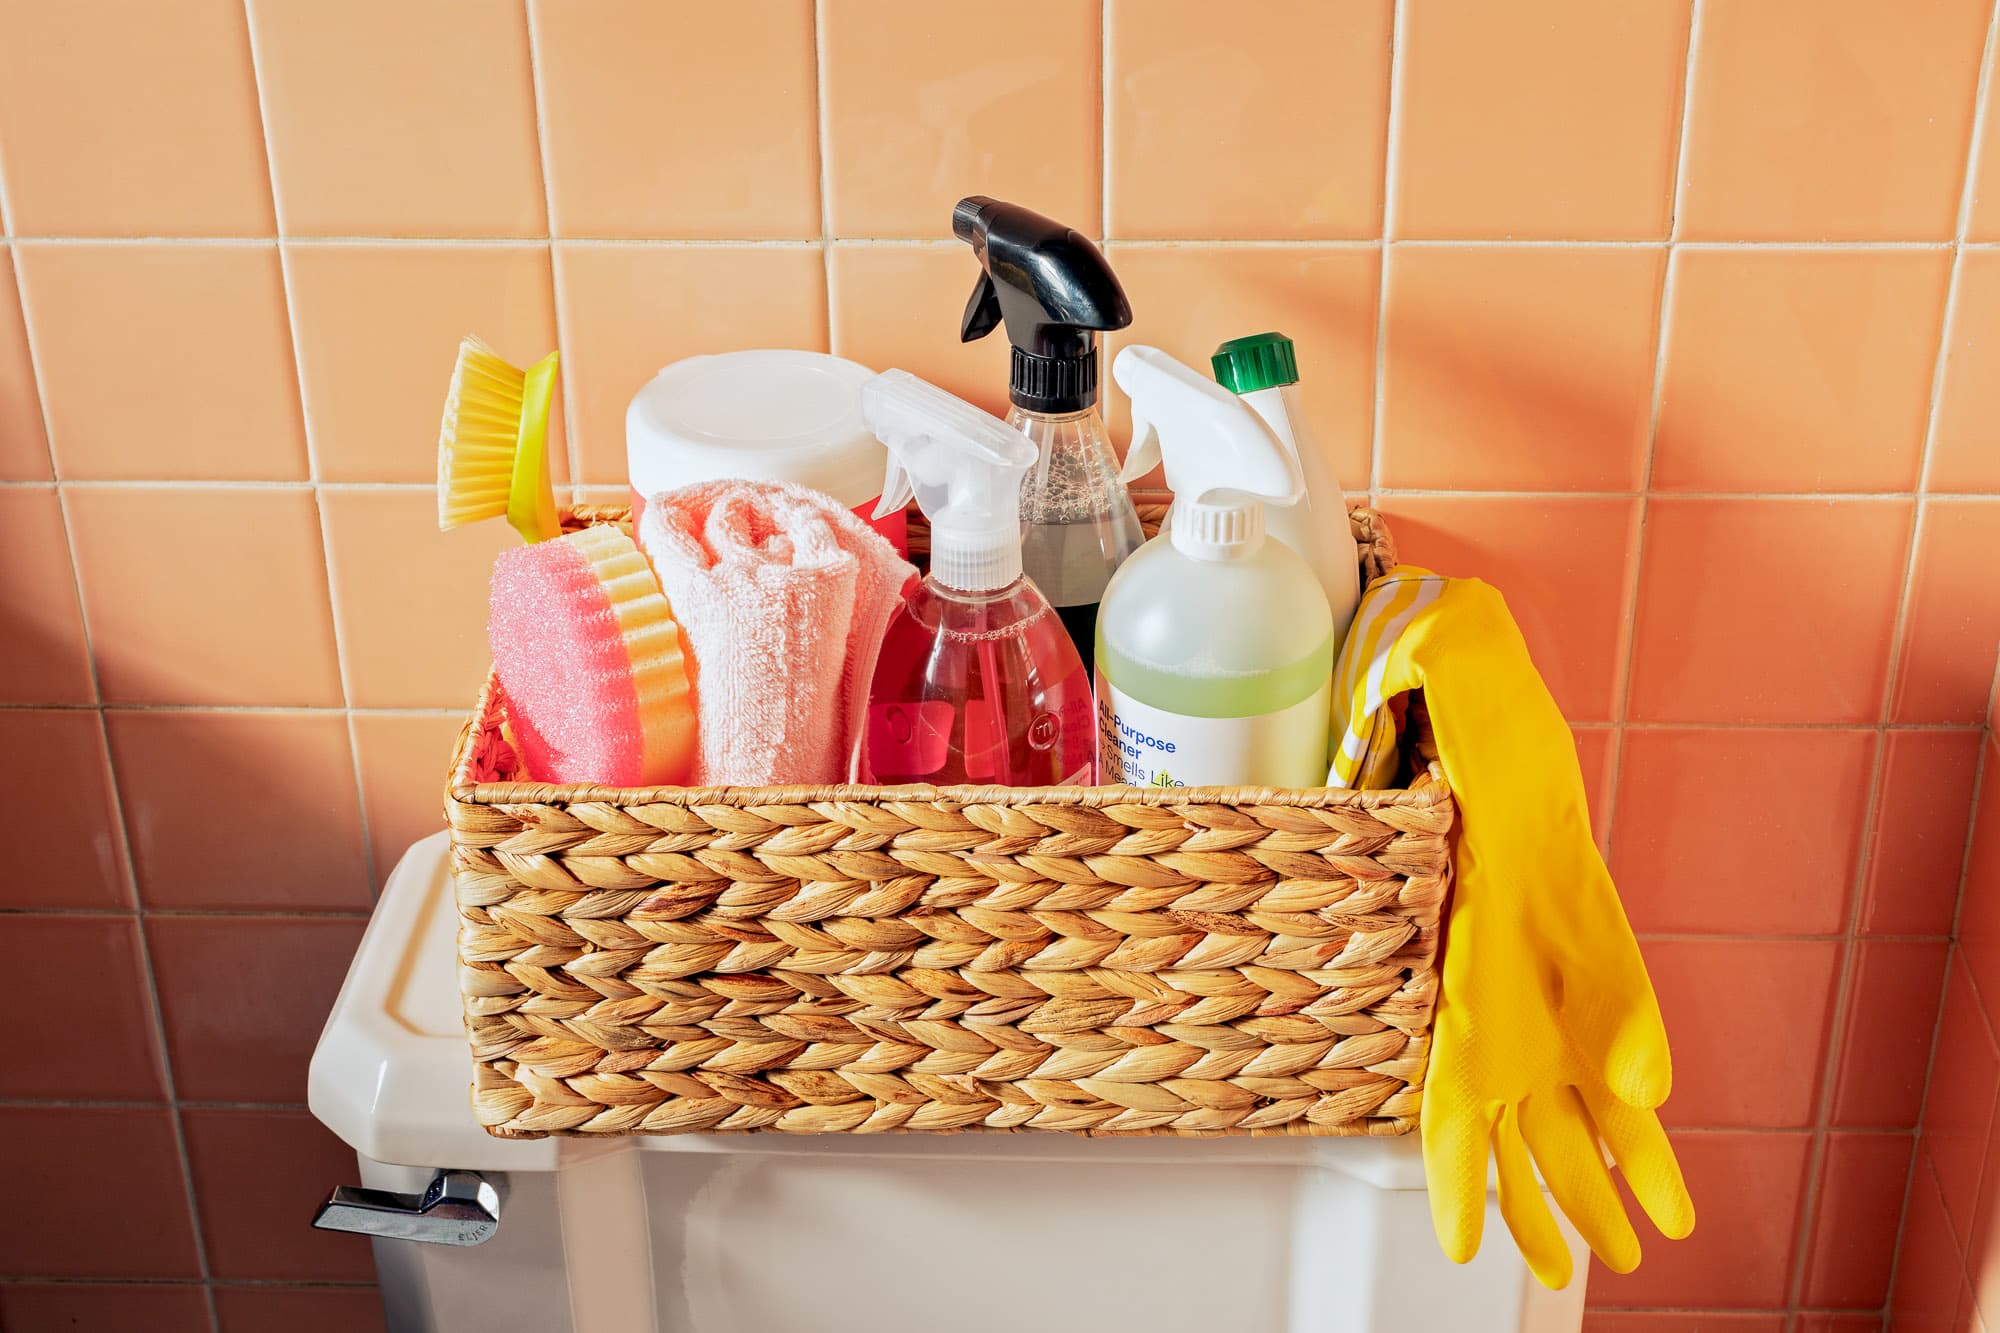 Cleaning Essentials, Towels, Trash Cans, Brooms